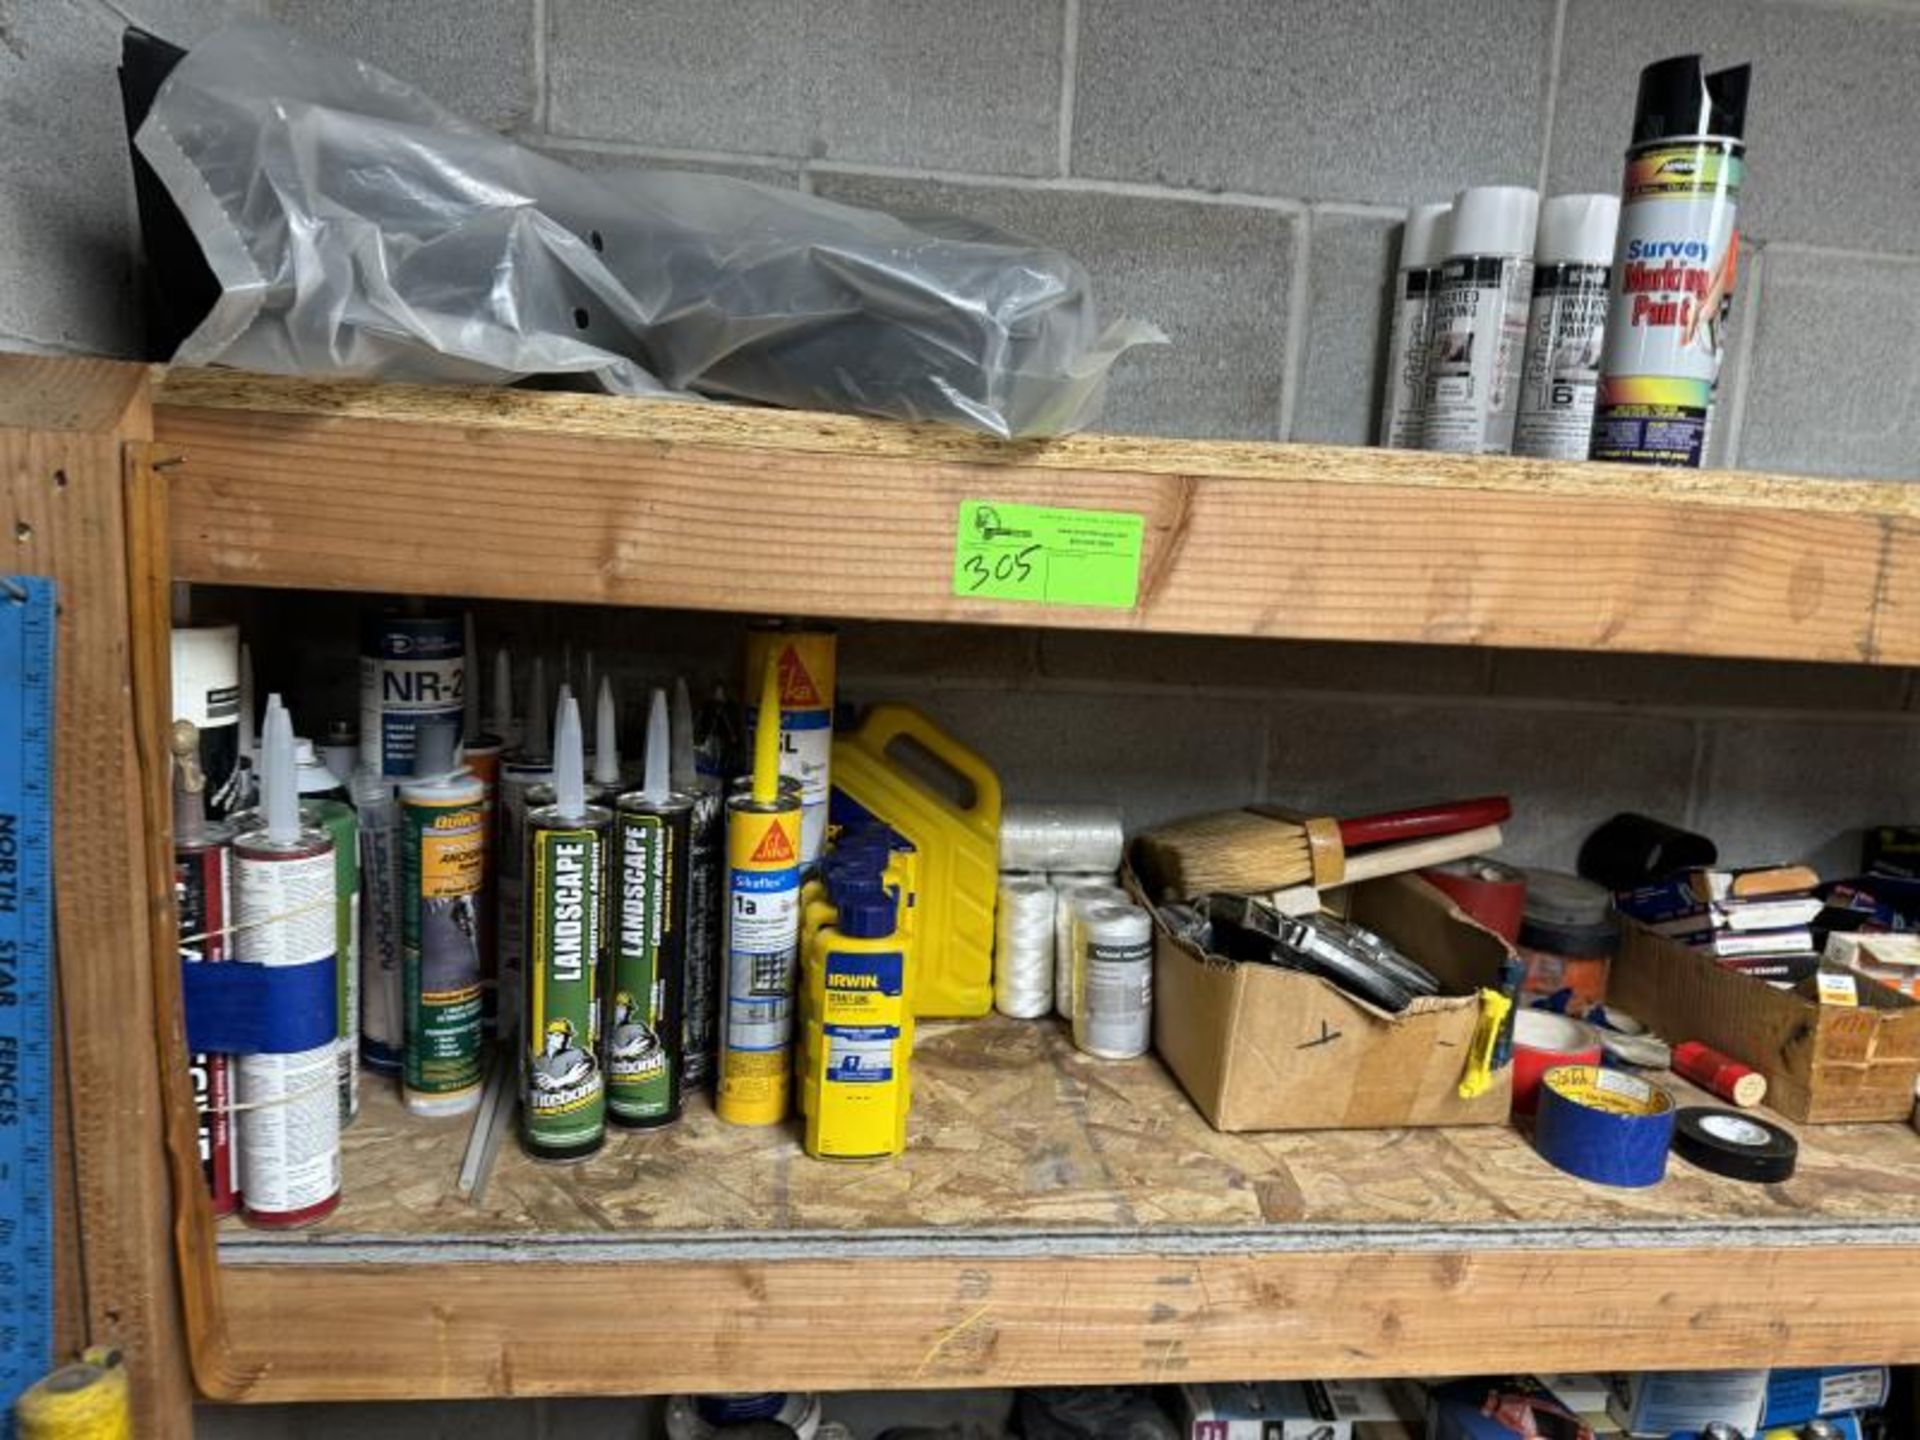 Contents of Shelving Unit (NOT SHELF) Including: Spray Paint, Concrete Adhesive, Vehicles Fuses, Veh - Image 2 of 11